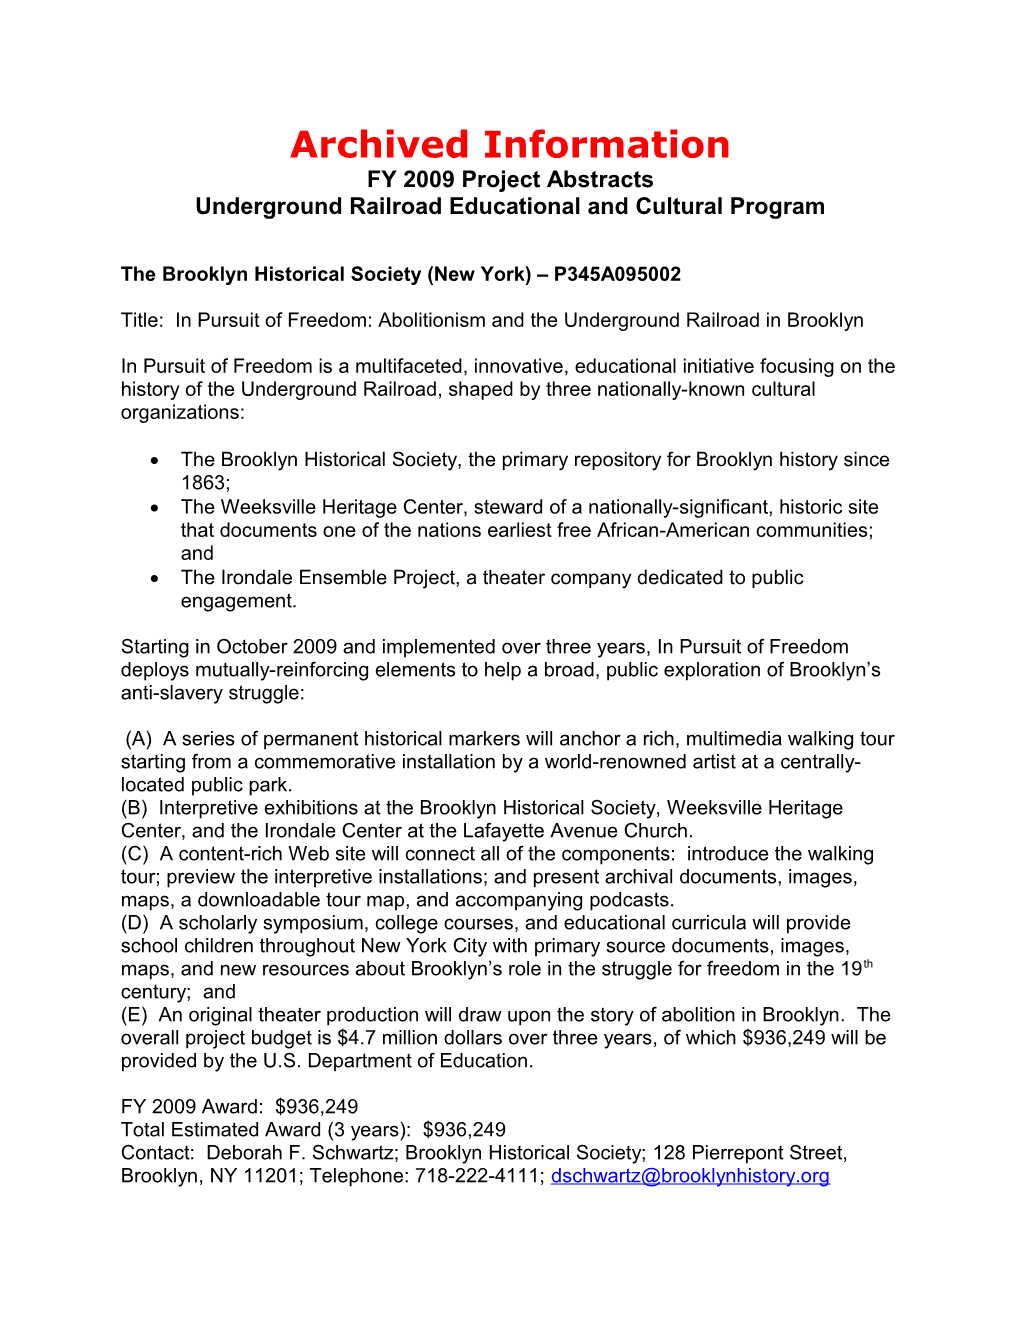 Archived: FY 2009 Project Abstracts for the Underground Railroad Educational and Cultural